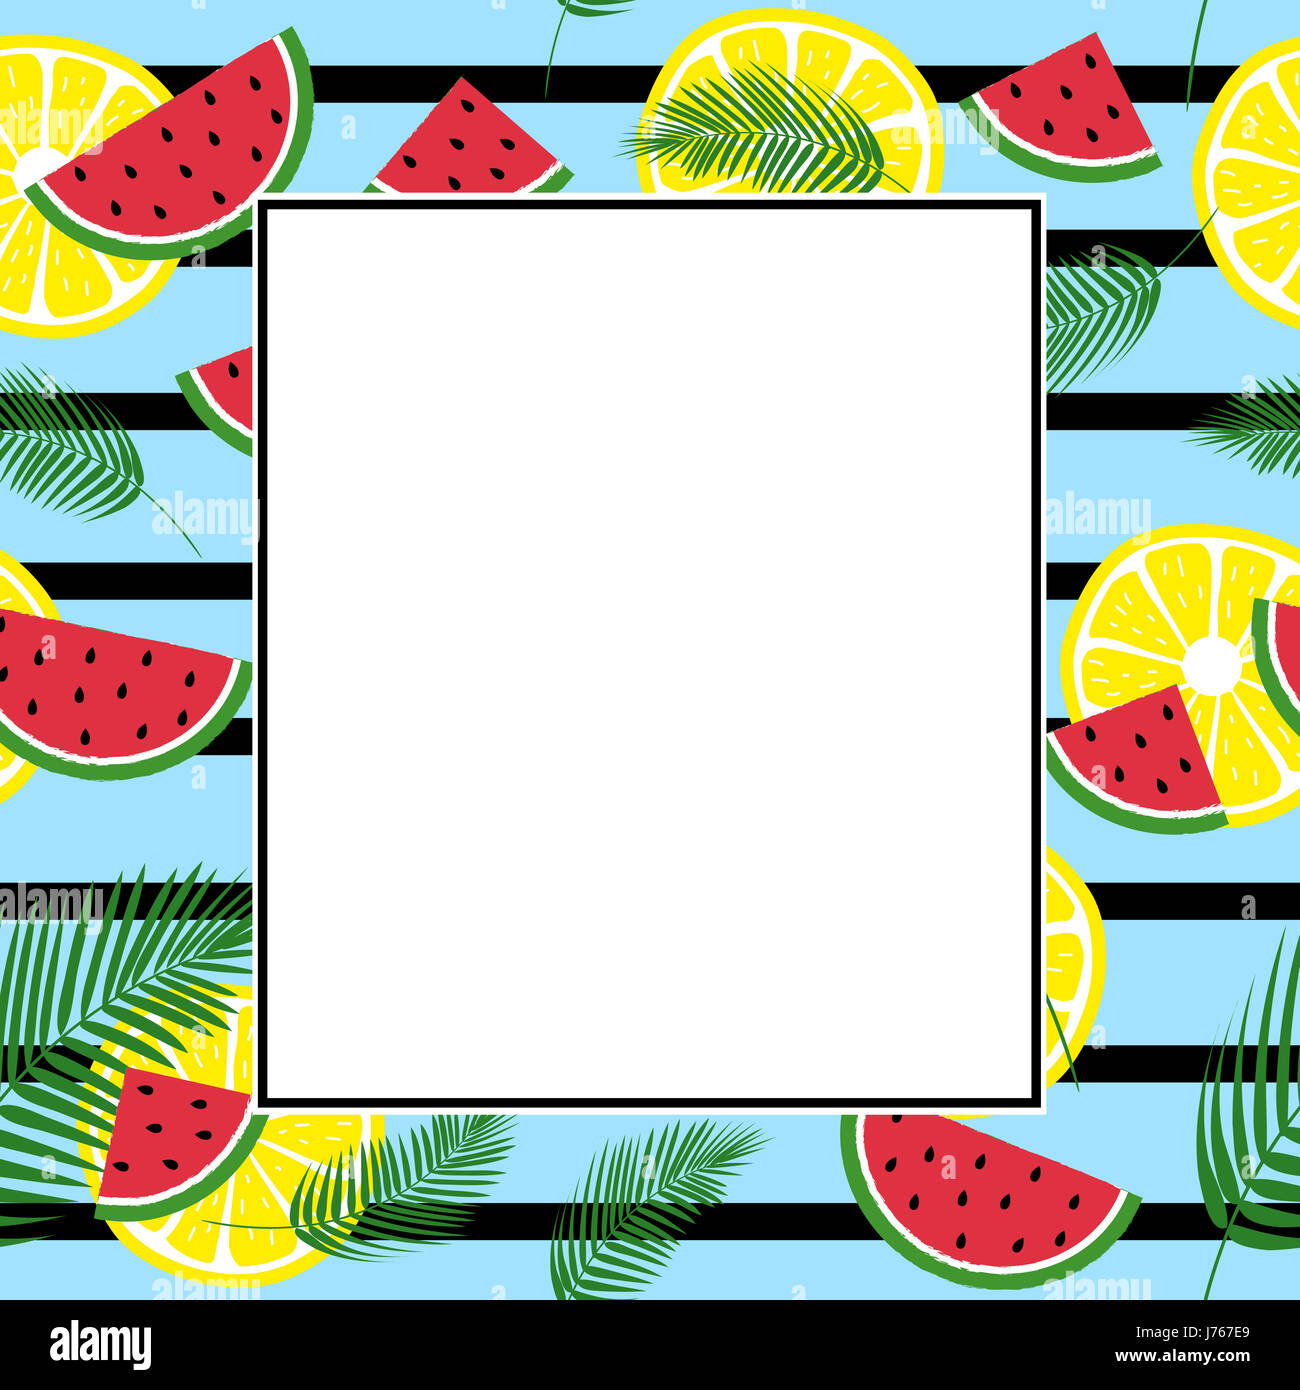 Summer exotic frame with fresh watermelons Stock Photo